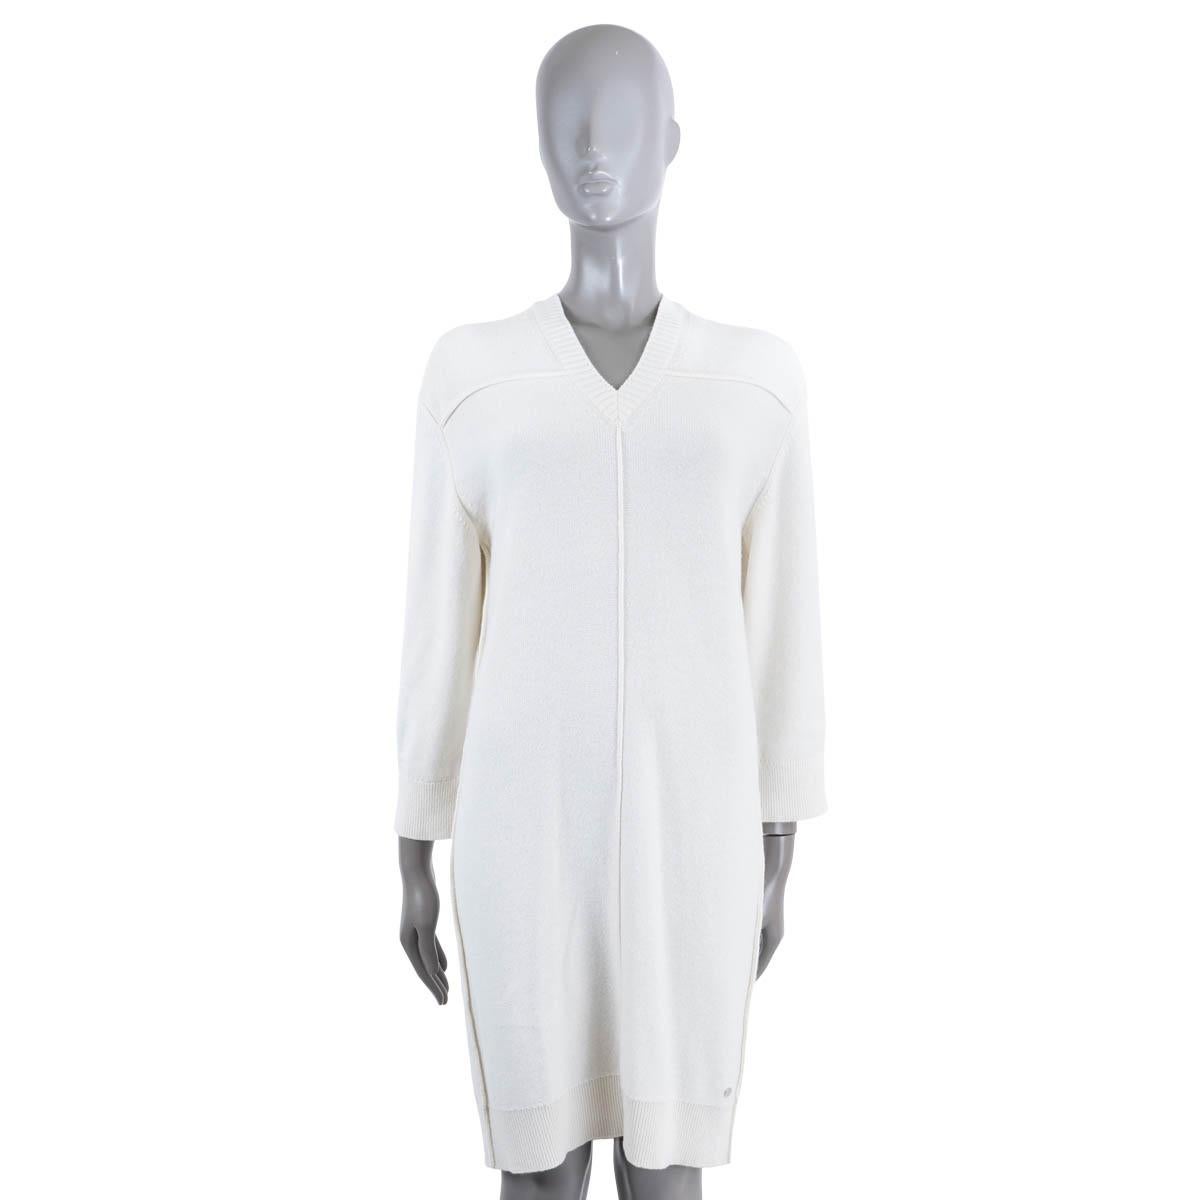 100% authentic Hermès knit dress in white cashmere (100%). Features inside-out seems, logo button and rib-knit V-neck, cuffs and hem. Unlined. Has been worn and is in excellent condition.

Measurements
Tag Size	38
Size	S
Shoulder Width	46cm